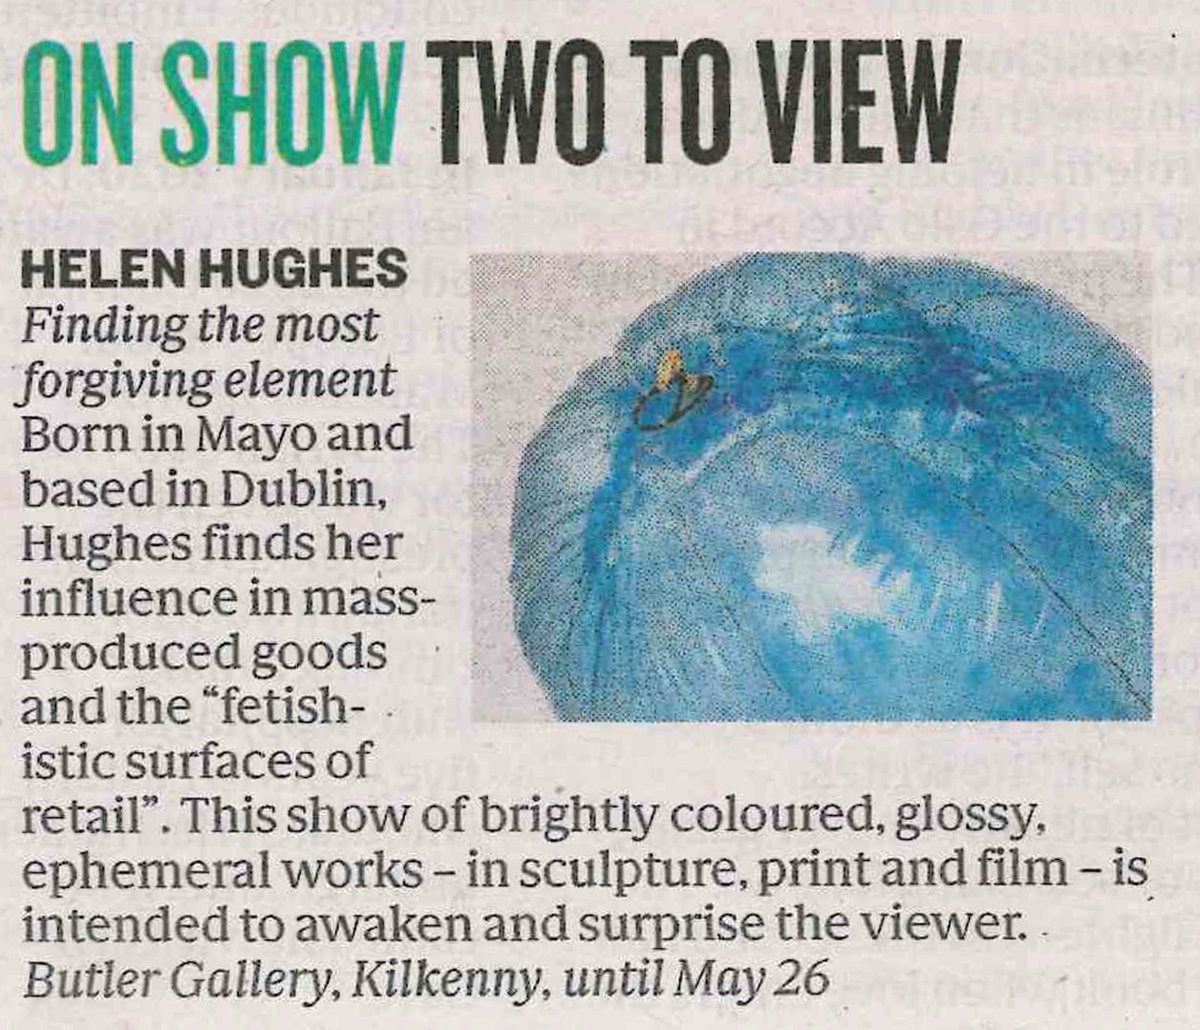 Many thanks to Niall MacMonagle of the @Independent_ie for highlighting our latest exhibition 'finding the most forgiving element' by Helen Hughes as one of your 'Two to View' Learn more on our website: tinyurl.com/2u42fvdb